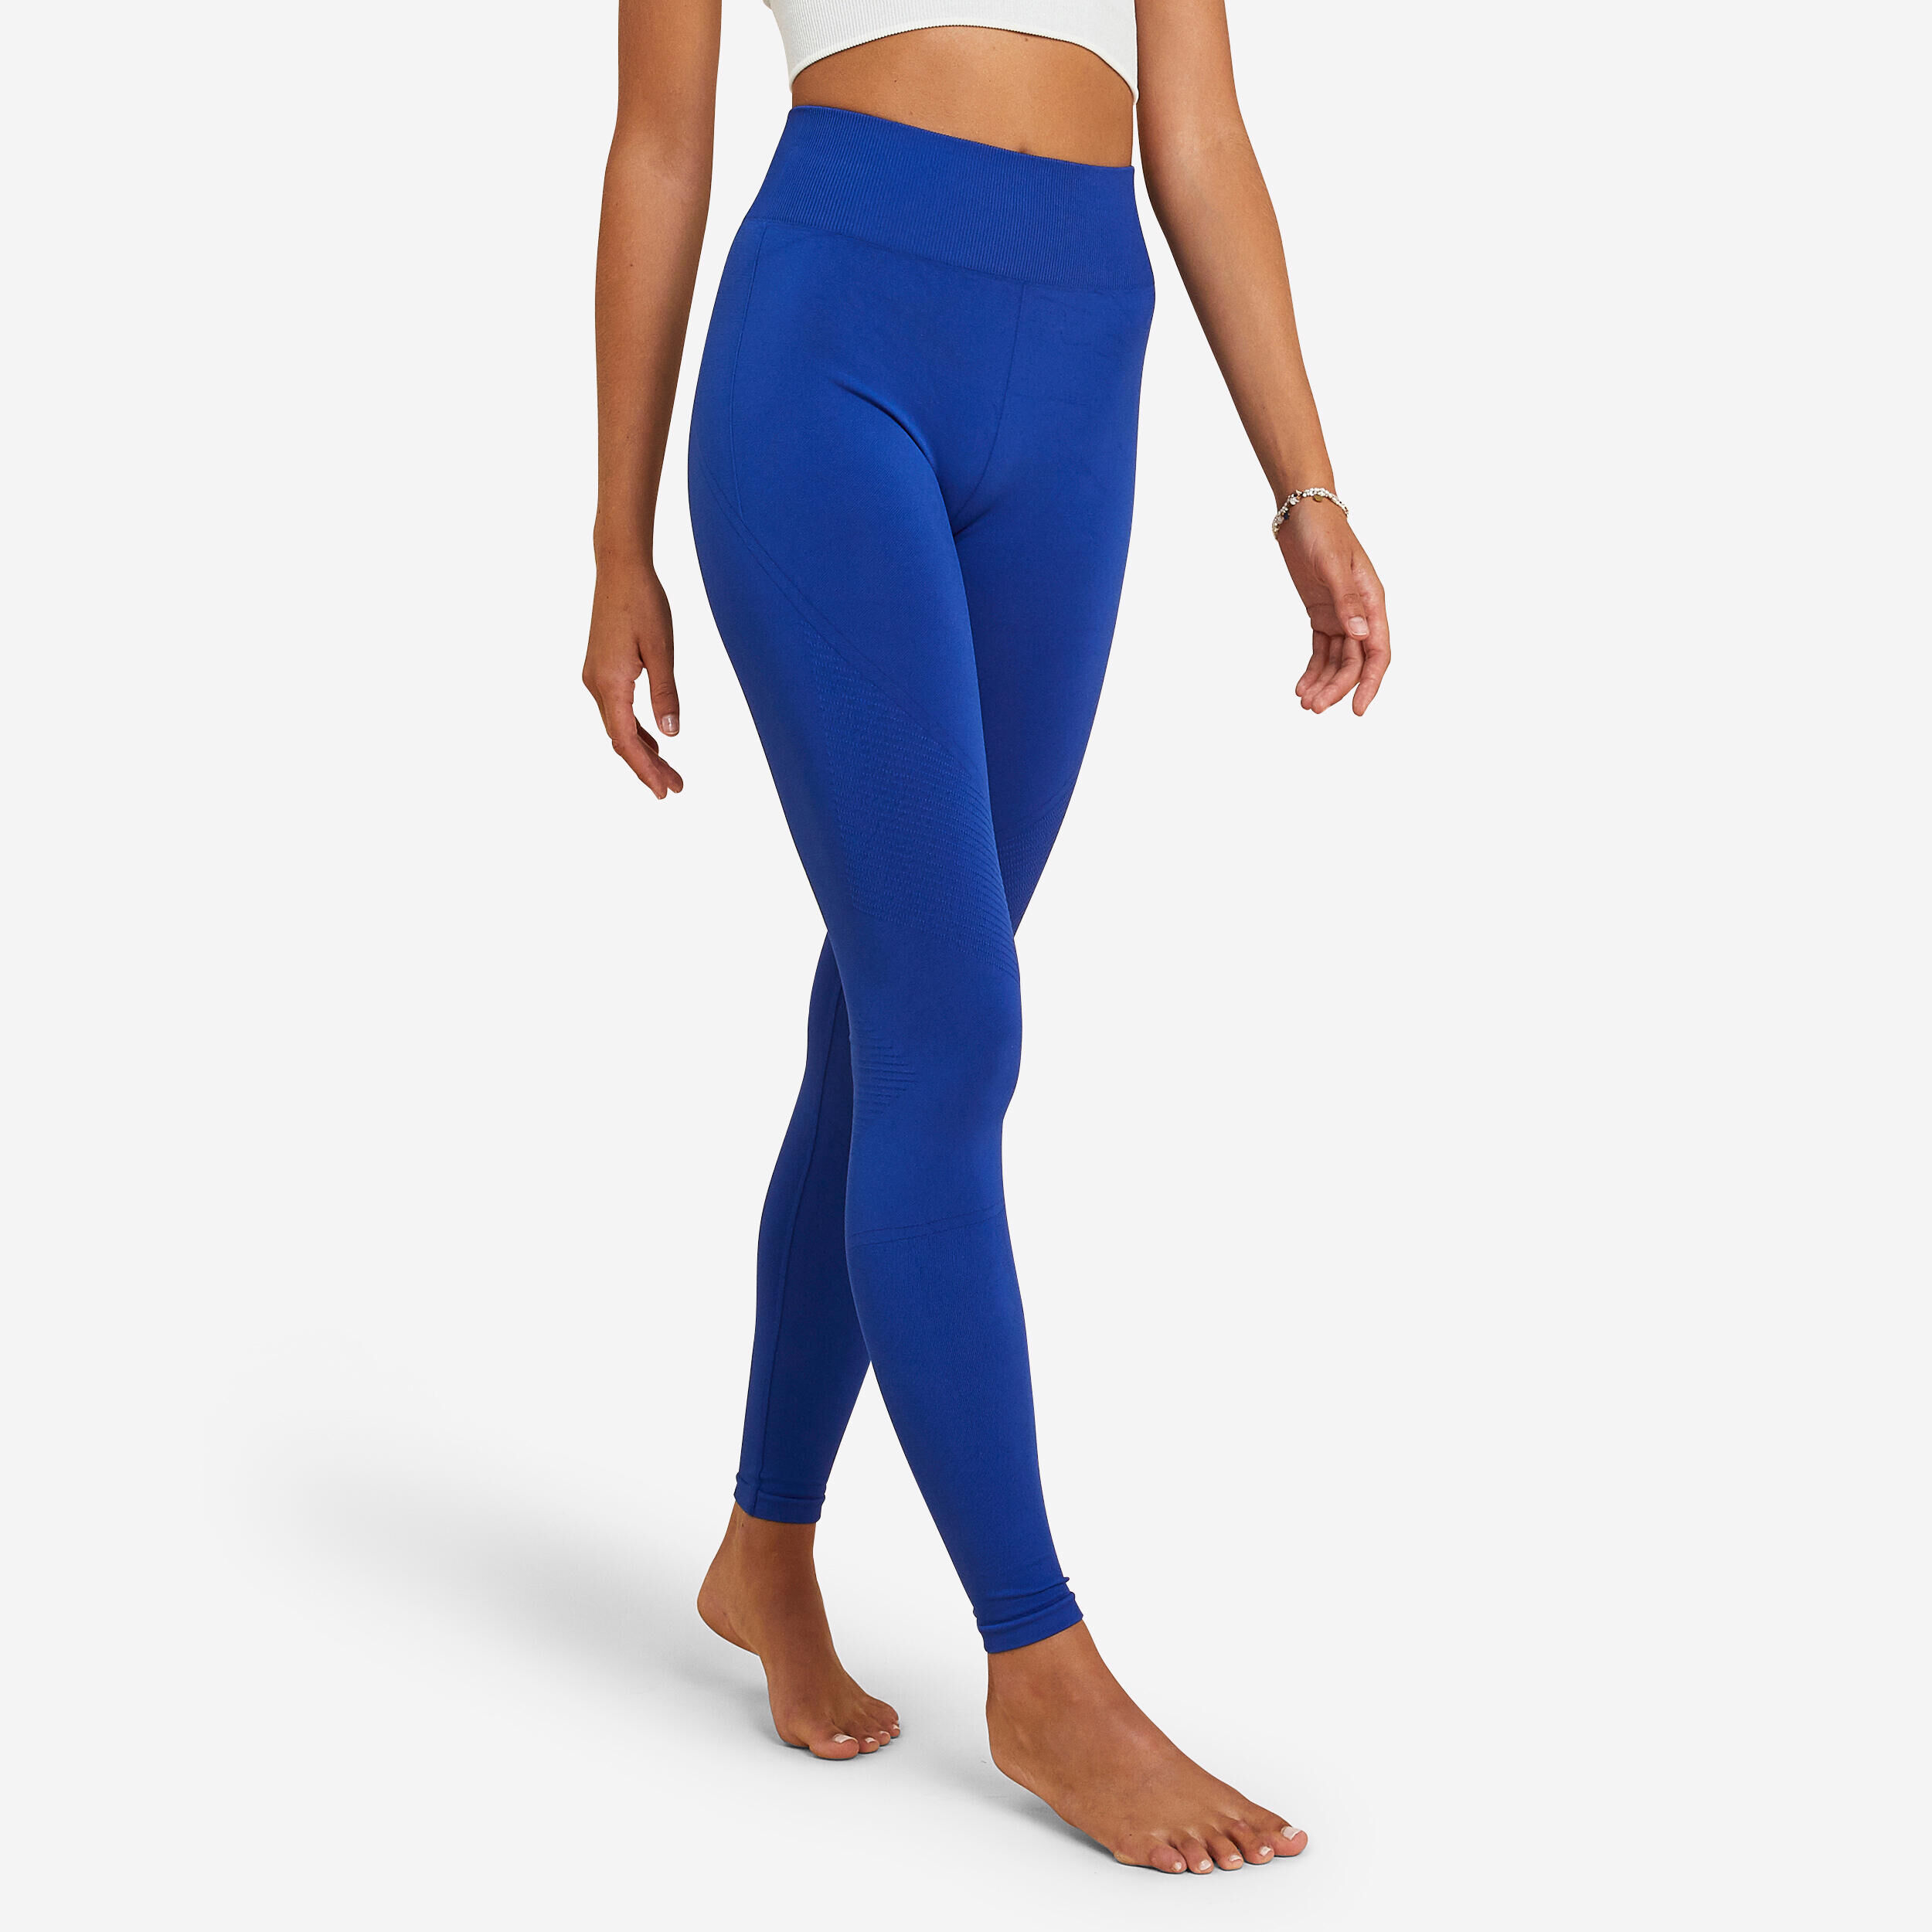 Girls Yoga Pants in leviathan's Roots Design -  UK